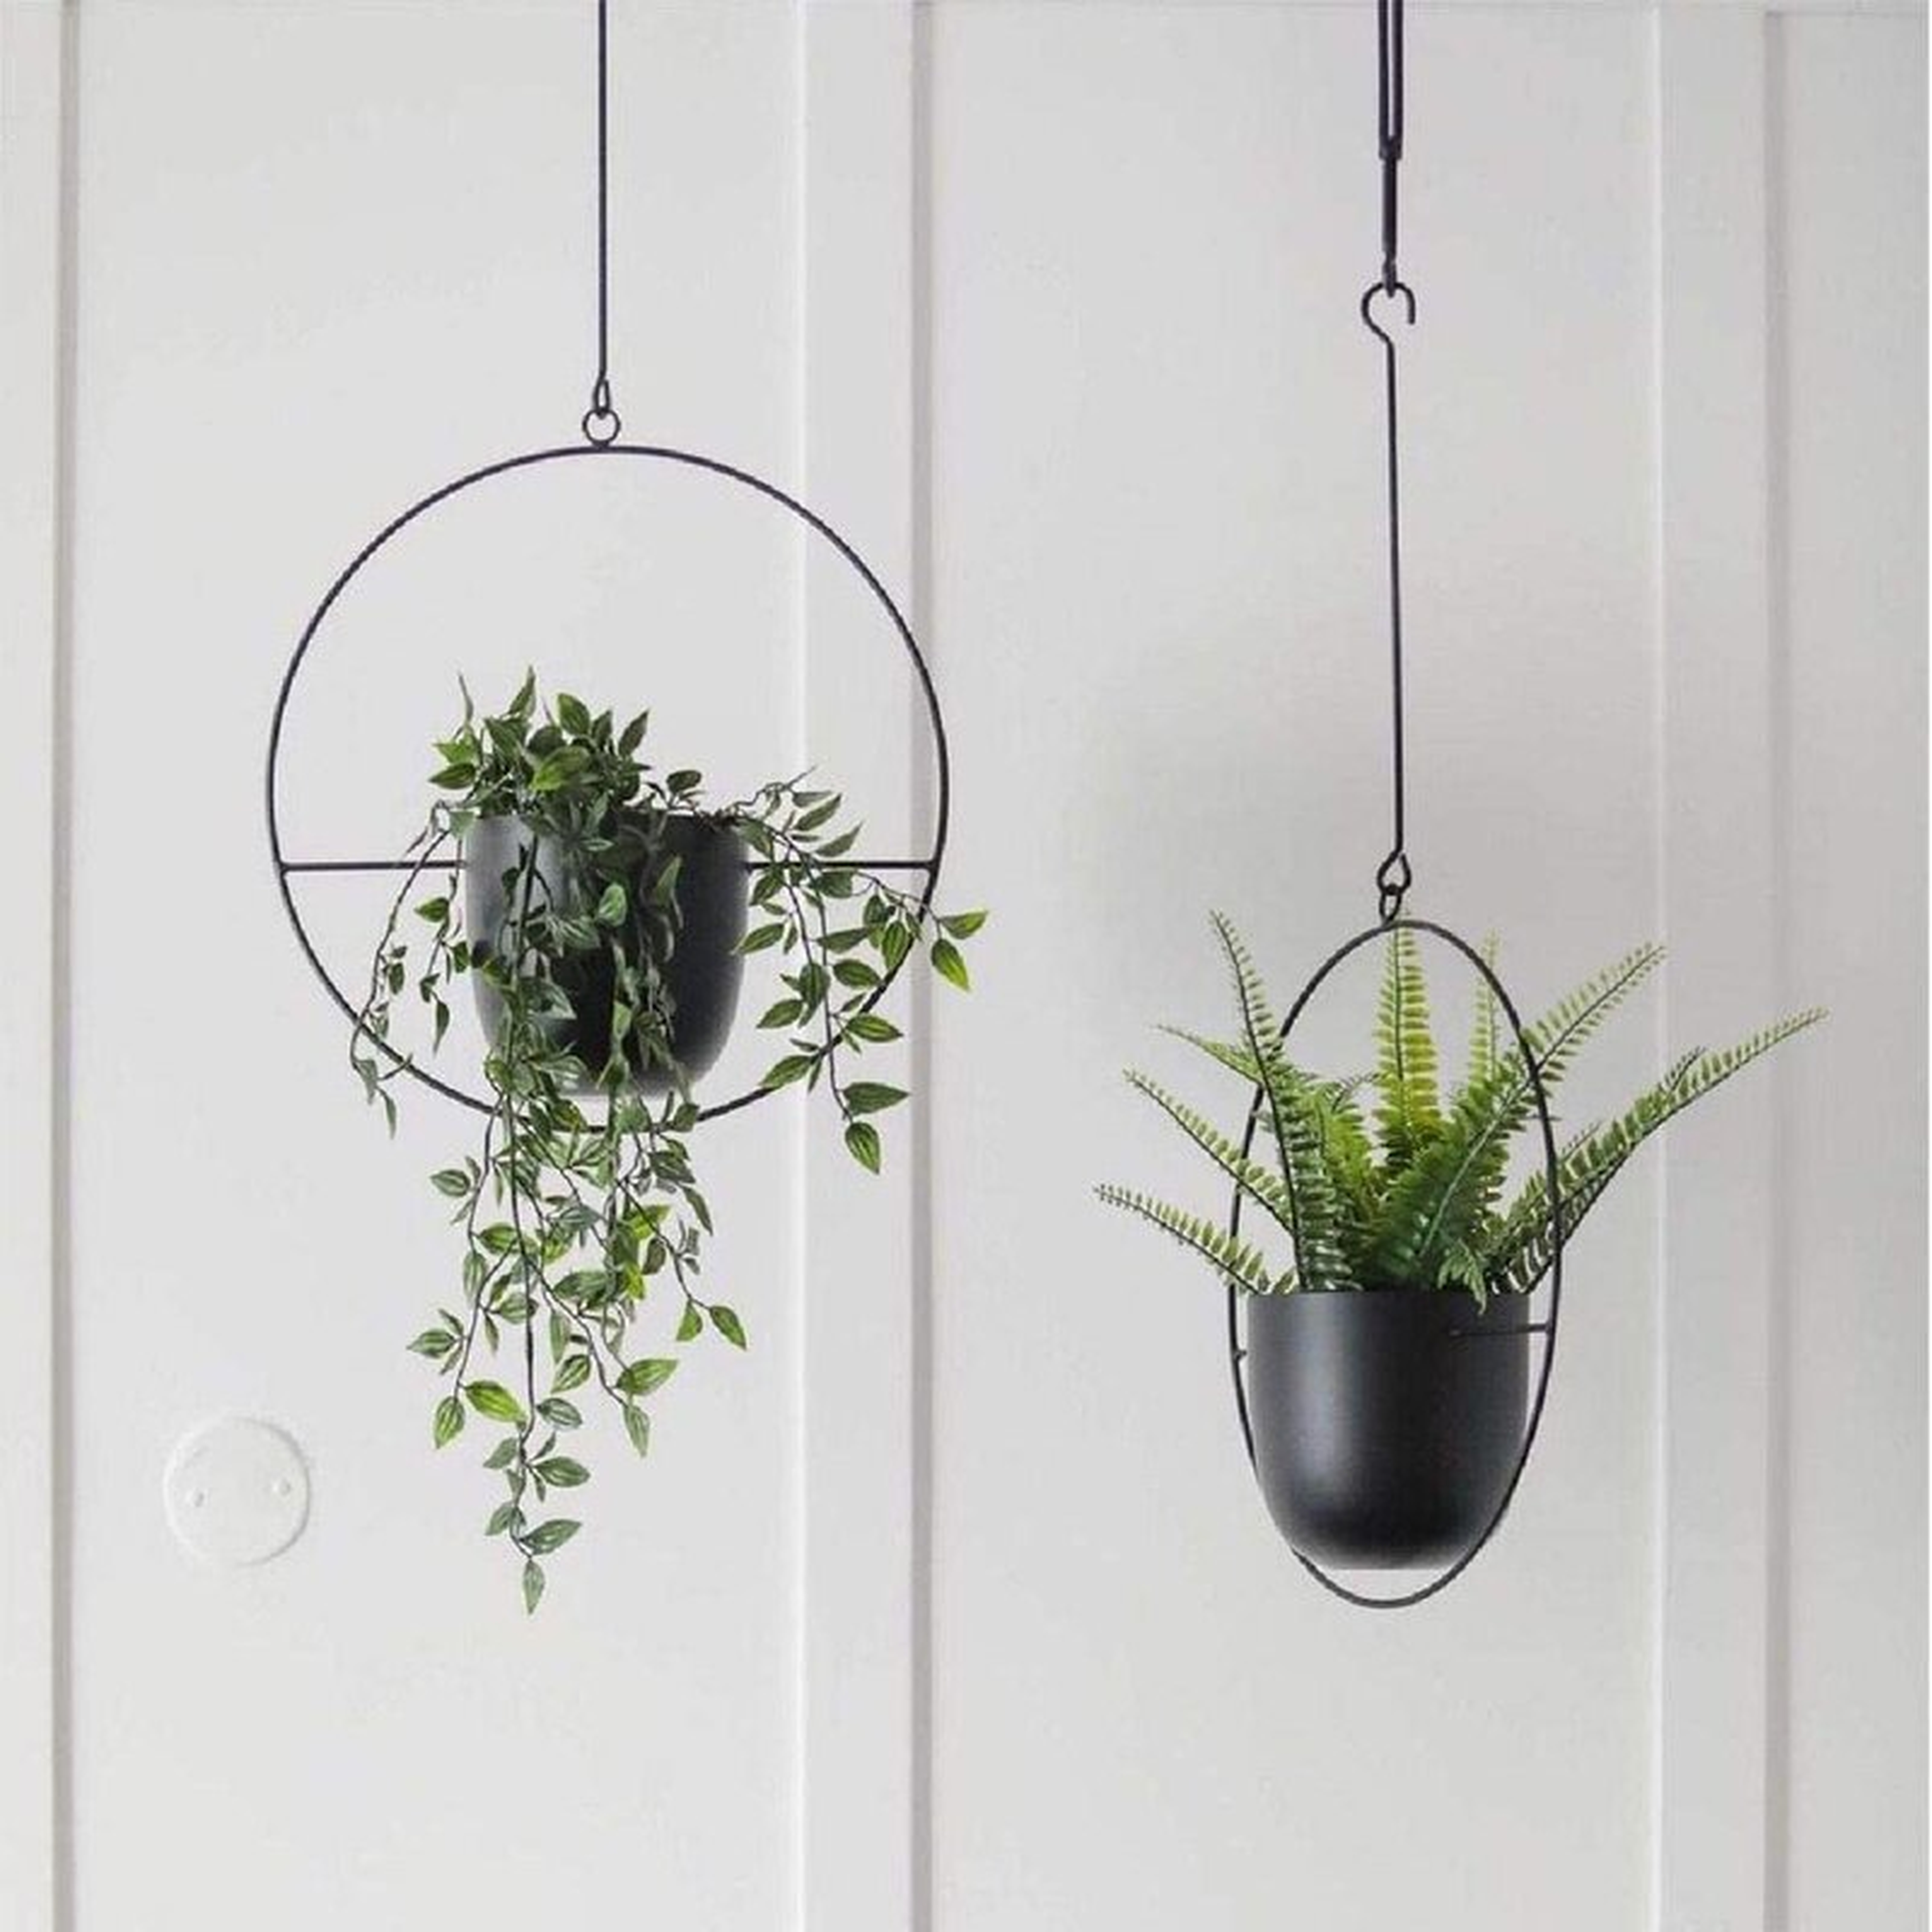 2 Pcs Hanging Planters For Indoor And Outdoor Plants With Hooks And Chains Metal Modern Wall And Ceiling Planter Minimalist Flower Pot Hold Planters Hanger For Home Decor - Wayfair